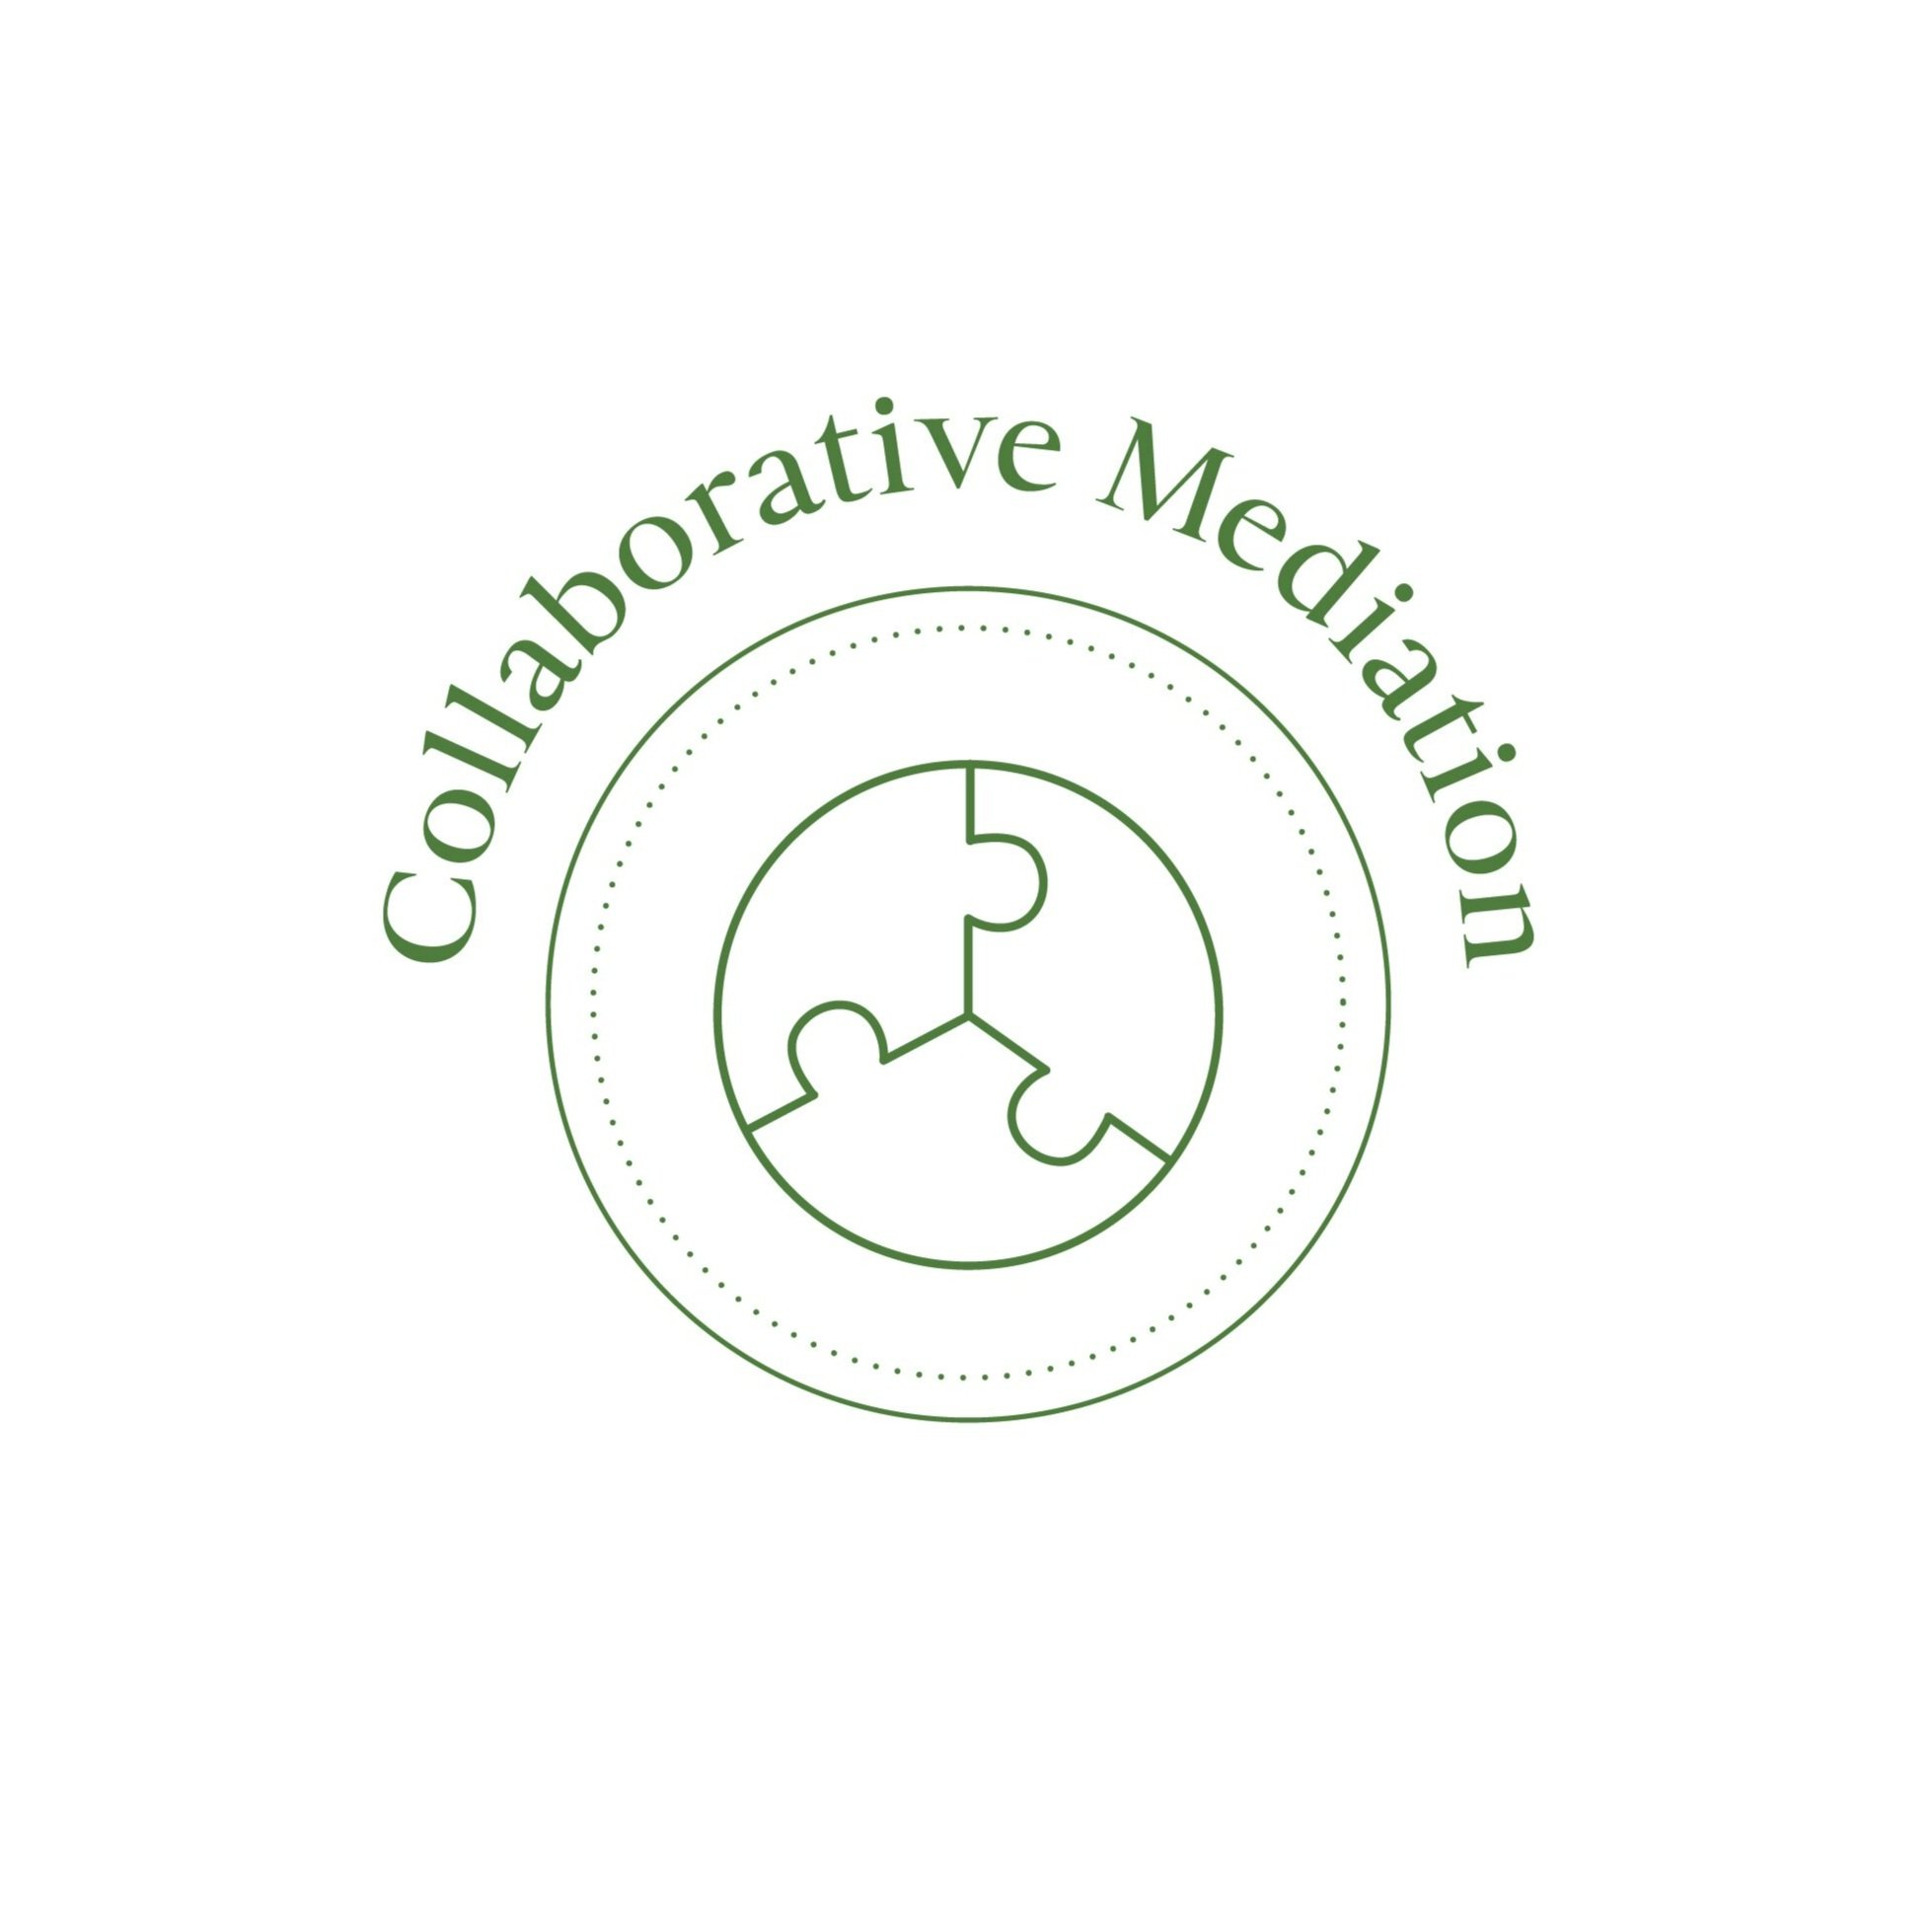 Collaborative+Mediation+Green+Icon+with+title.jpg